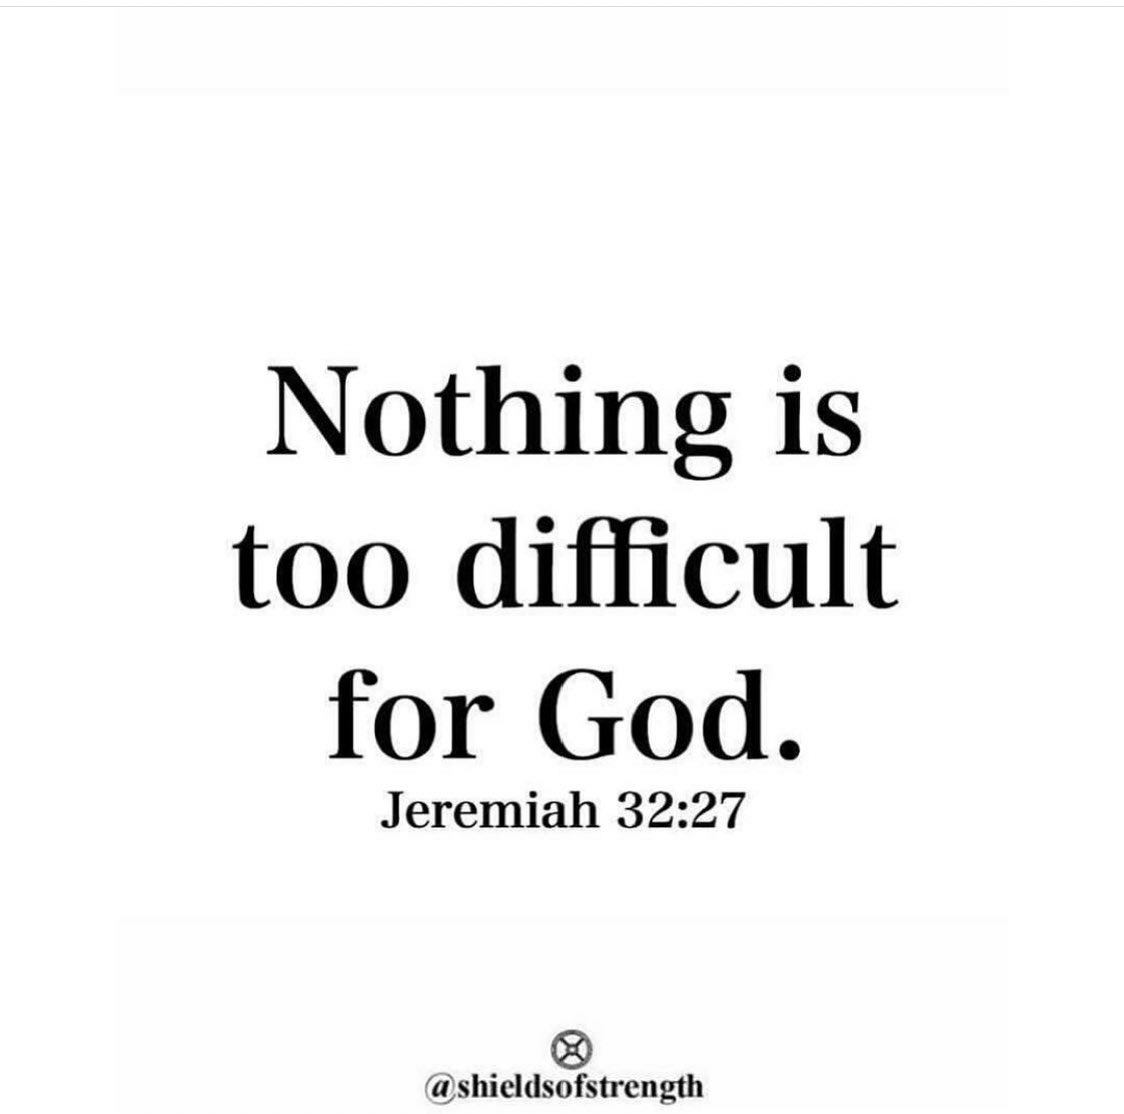 “Behold, I am the Lord, the God of all flesh. Is there anything too hard for Me? Jeremiah 32:27